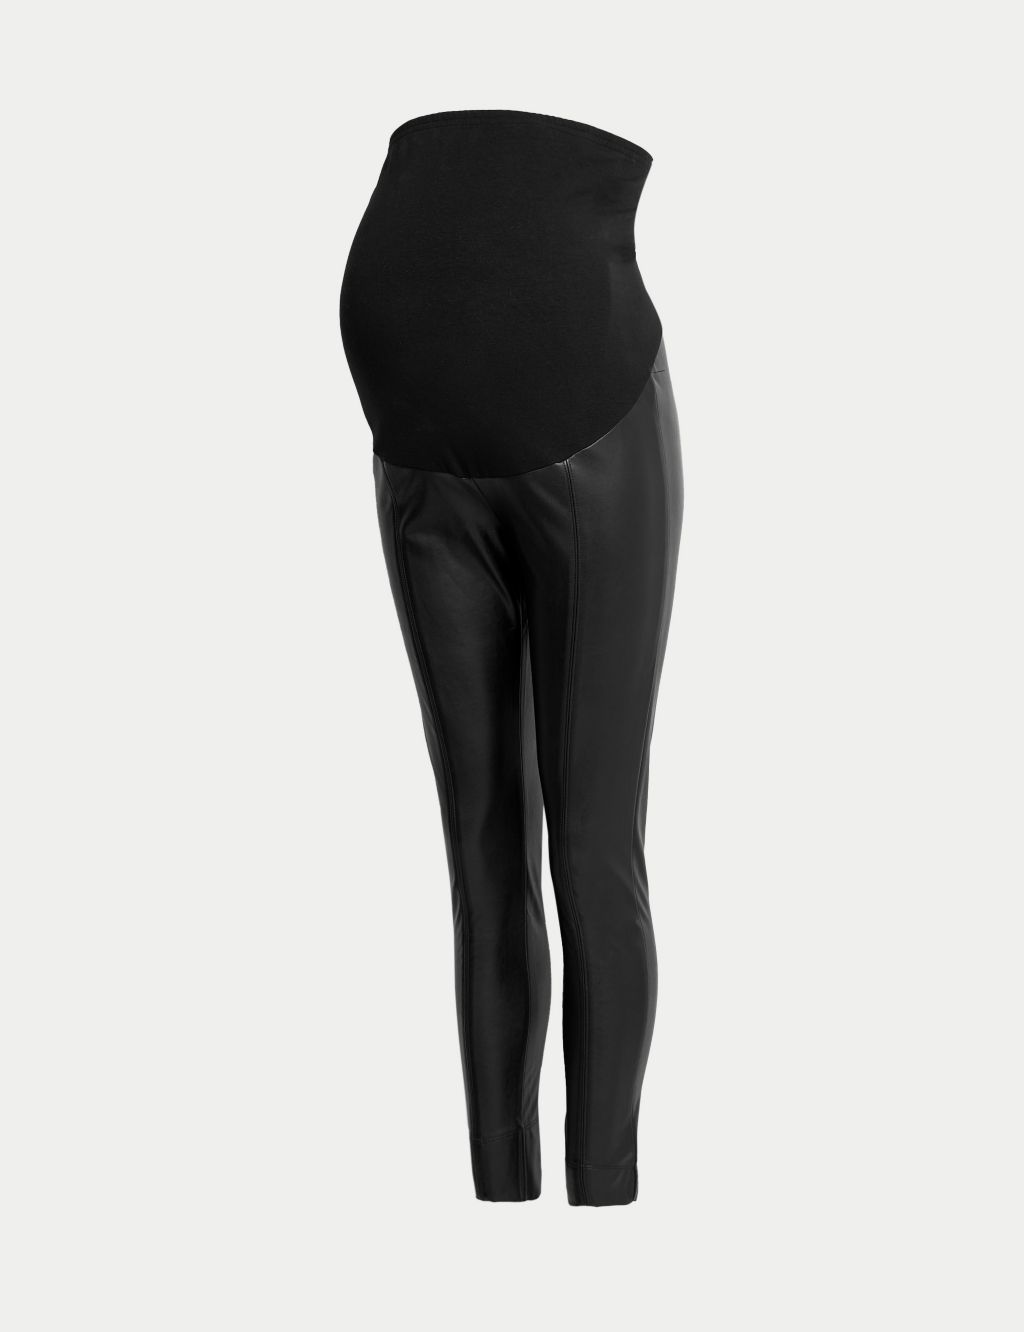 Maternity Leather Look Over Bump Leggings image 2